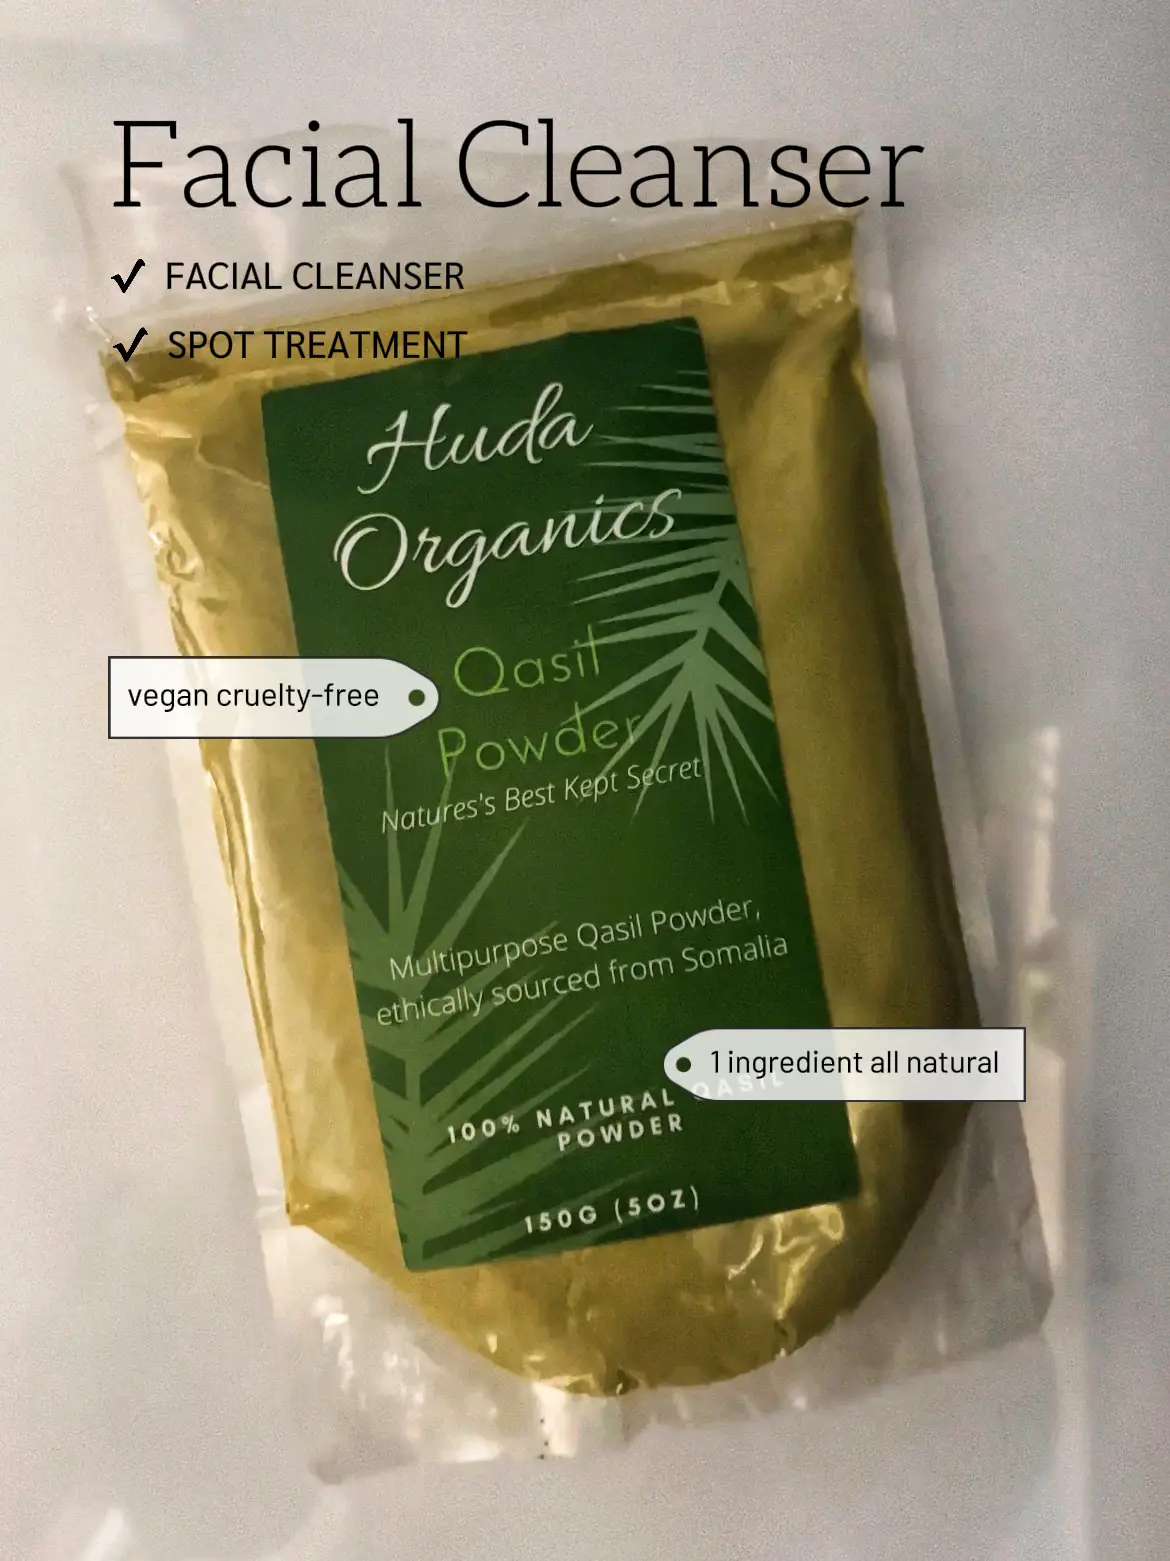 Huda Organics Qasil Powder 20 grams - Antient Somali Beauty Secret Natural  Multi-Purpose Deep Cleansing Mask for Face Hair and Body. Cleanses Helps  with Acne Provides Clear Skin